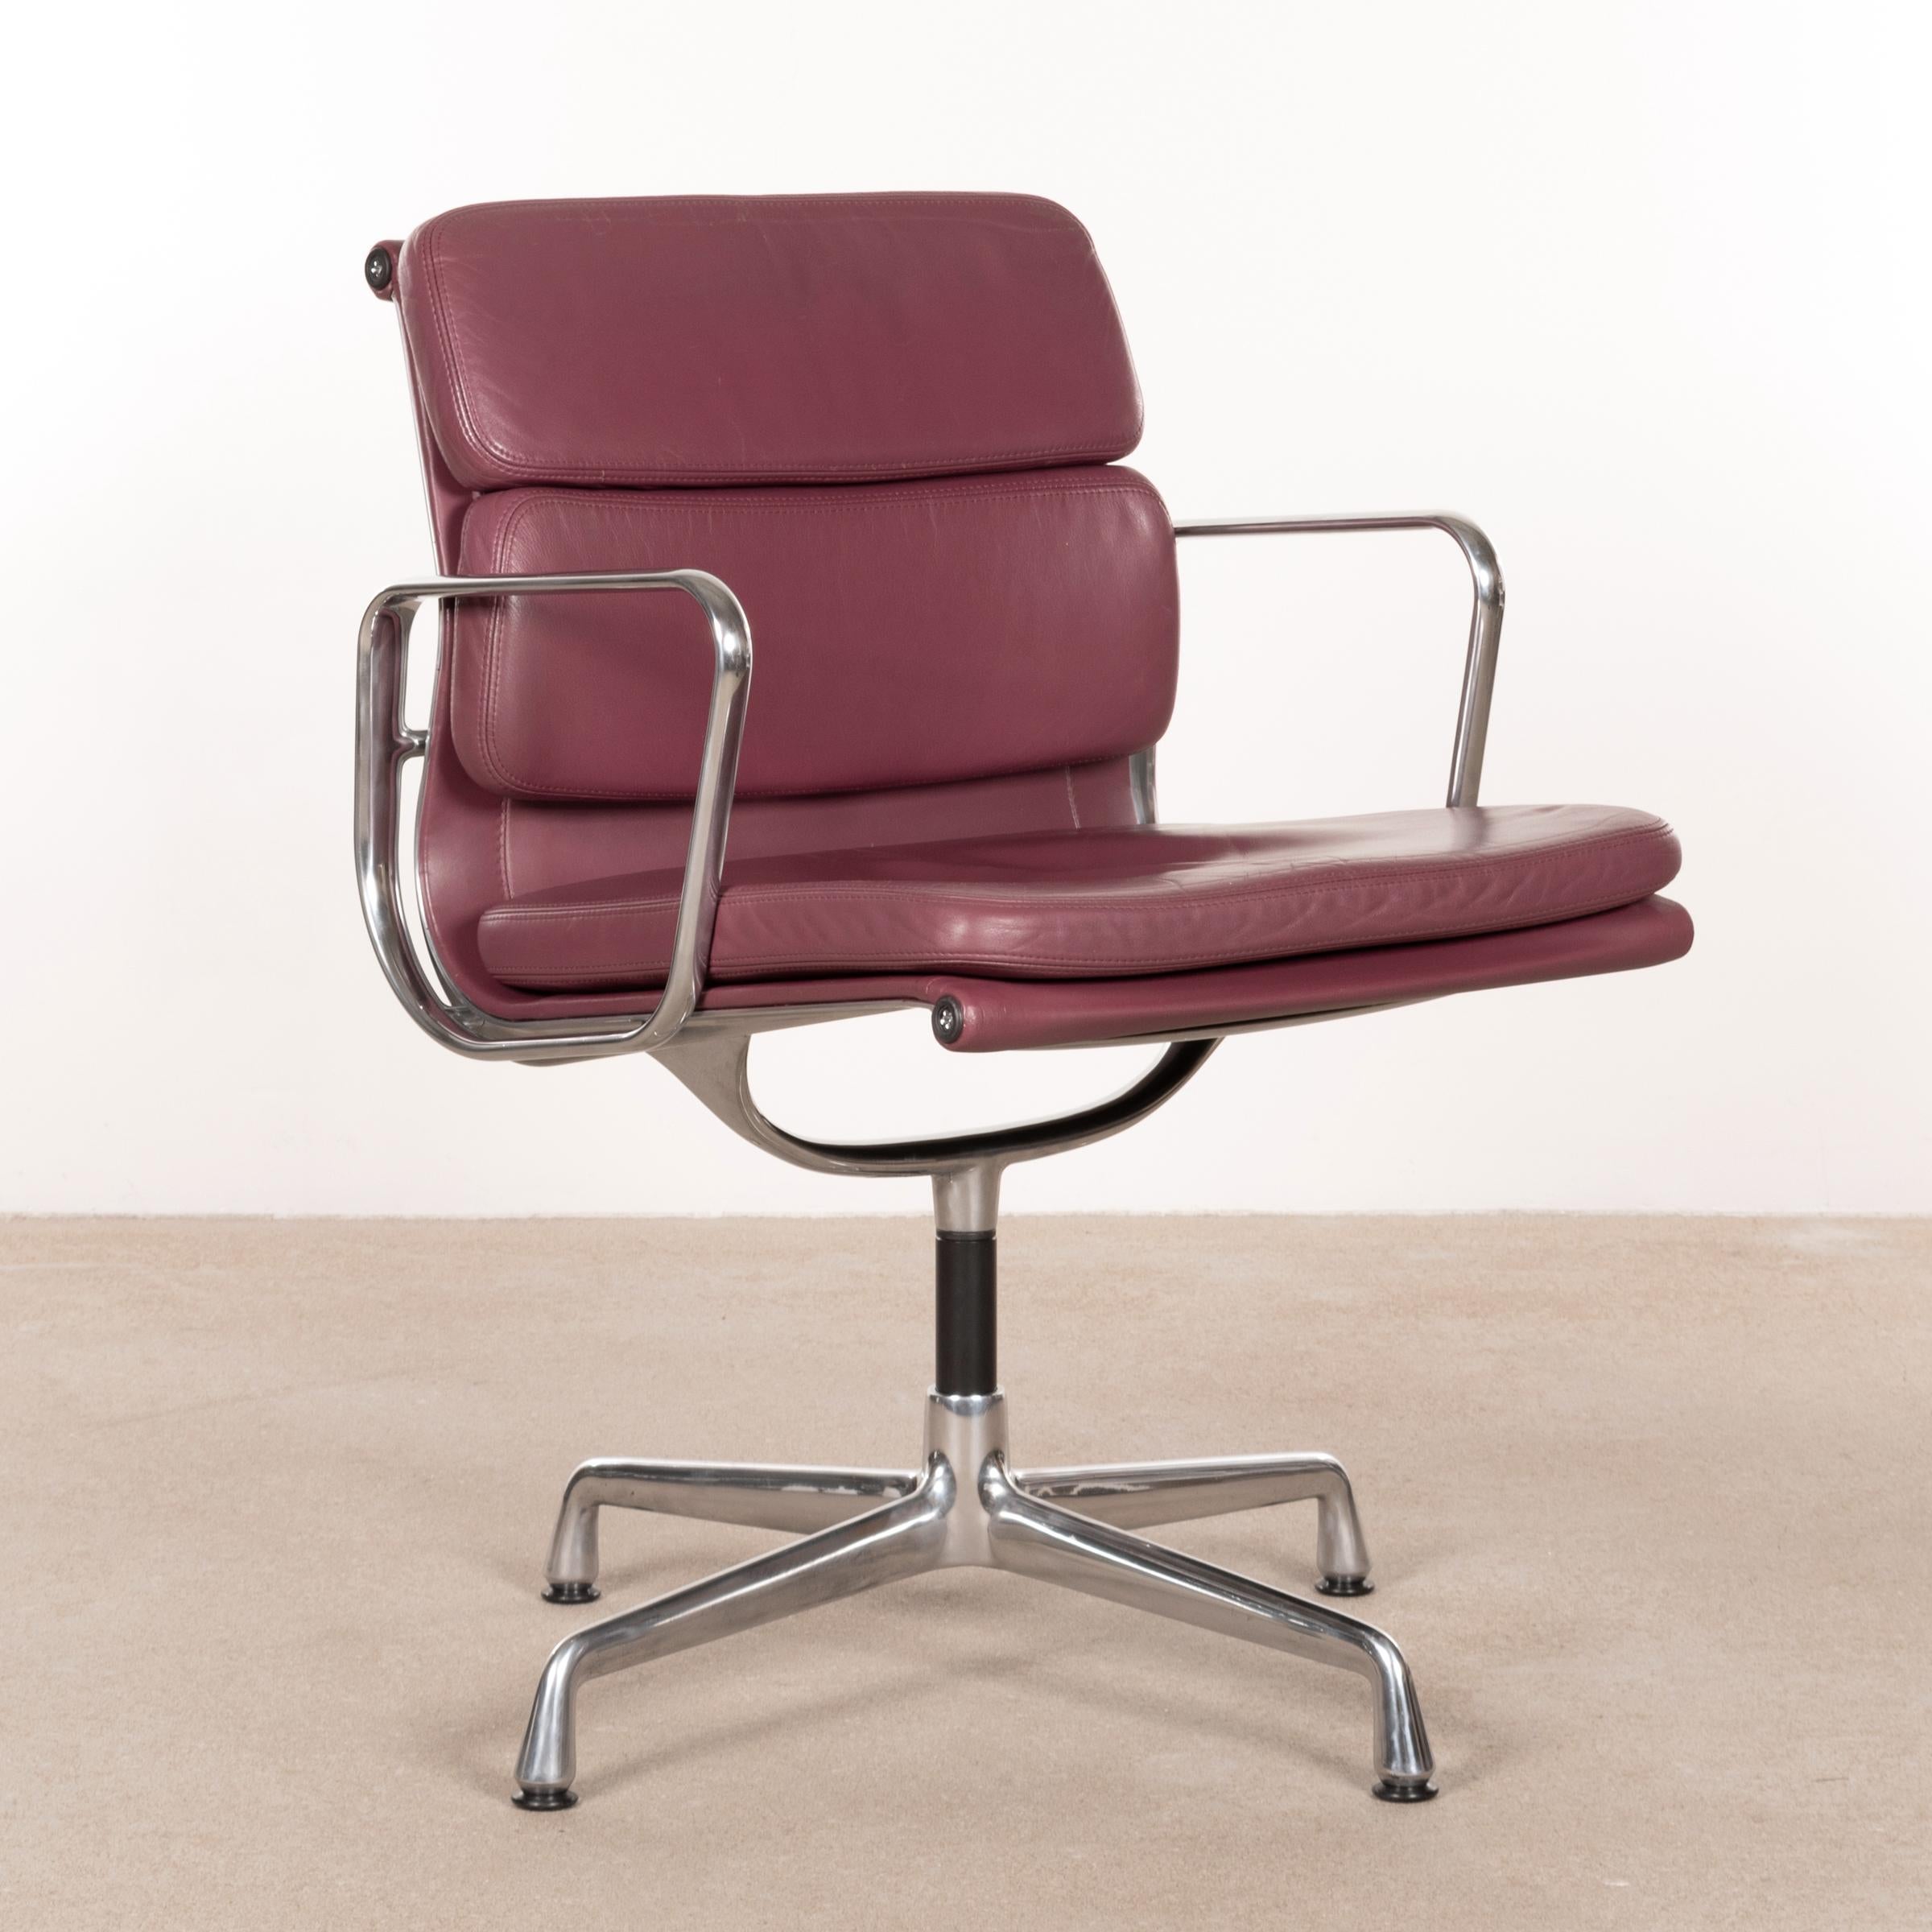 Polished Charles & Ray Eames EA208 Soft Pad Chair in Aubergine / Purple leather by Vitra